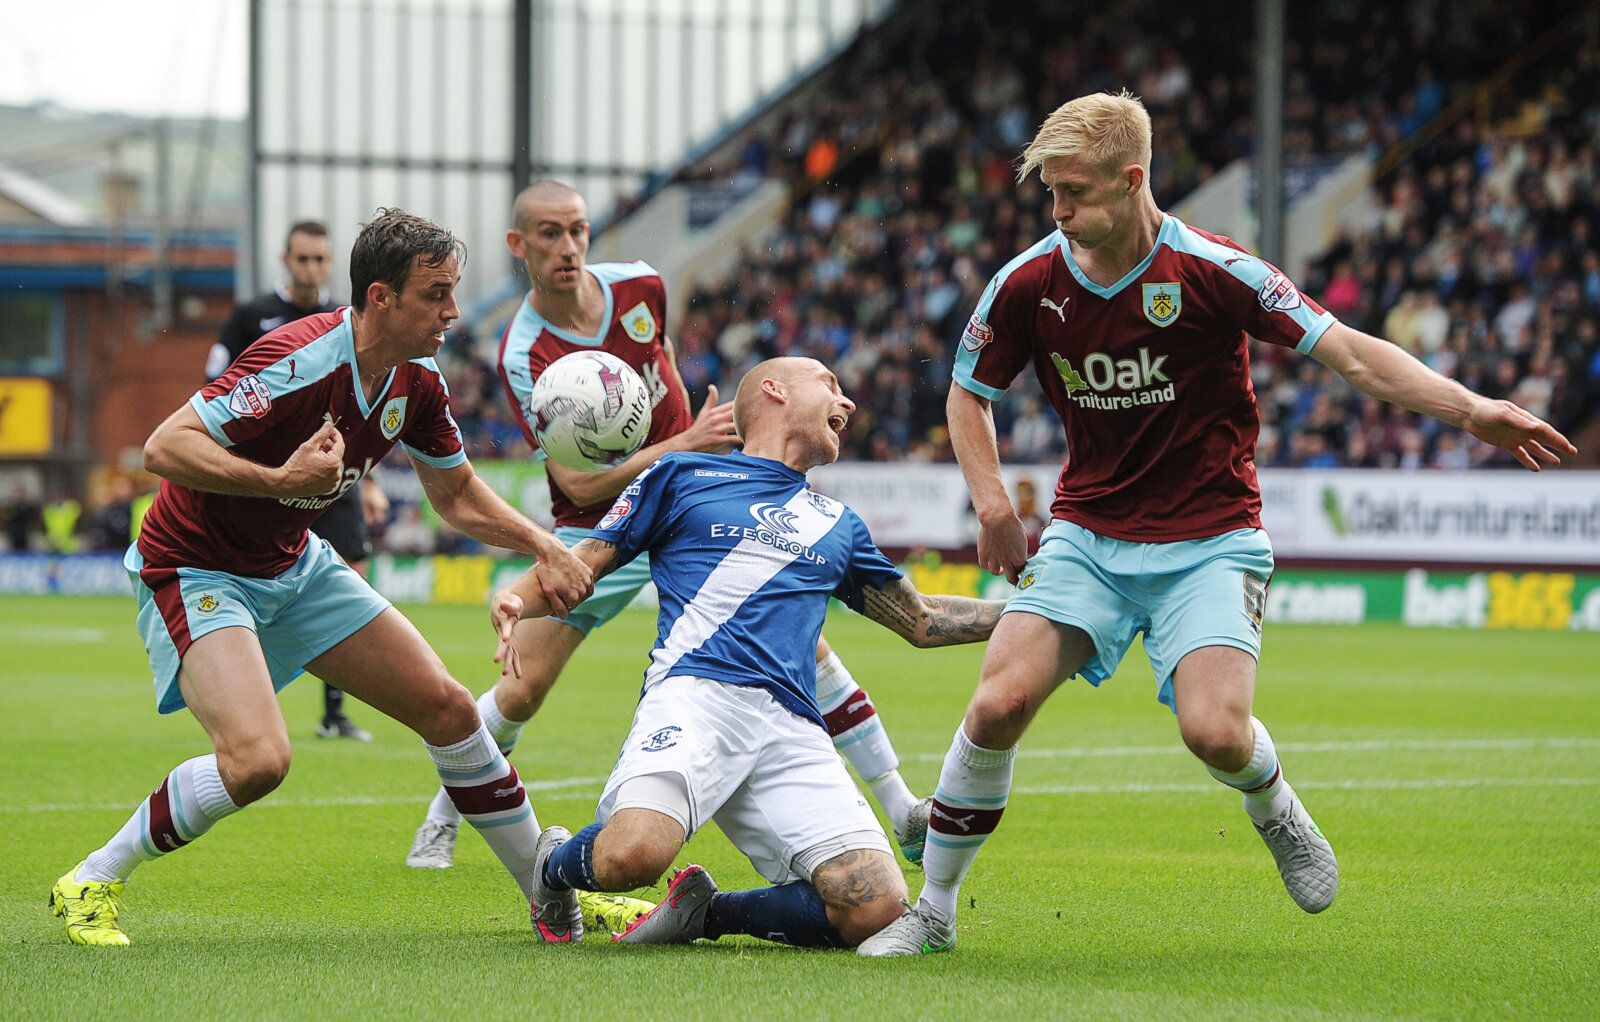 Football - Burnley v Birmingham City - Sky Bet Football League Championship - Turf Moor - 15/8/15 
Birmingham City's David Cotterill in action with Burnley's Michael Duff (L) and Ben Mee 
Mandatory Credit: Action Images / Paul Burrows 
Livepic 
EDITORIAL USE ONLY. No use with unauthorized audio, video, data, fixture lists, club/league logos or 